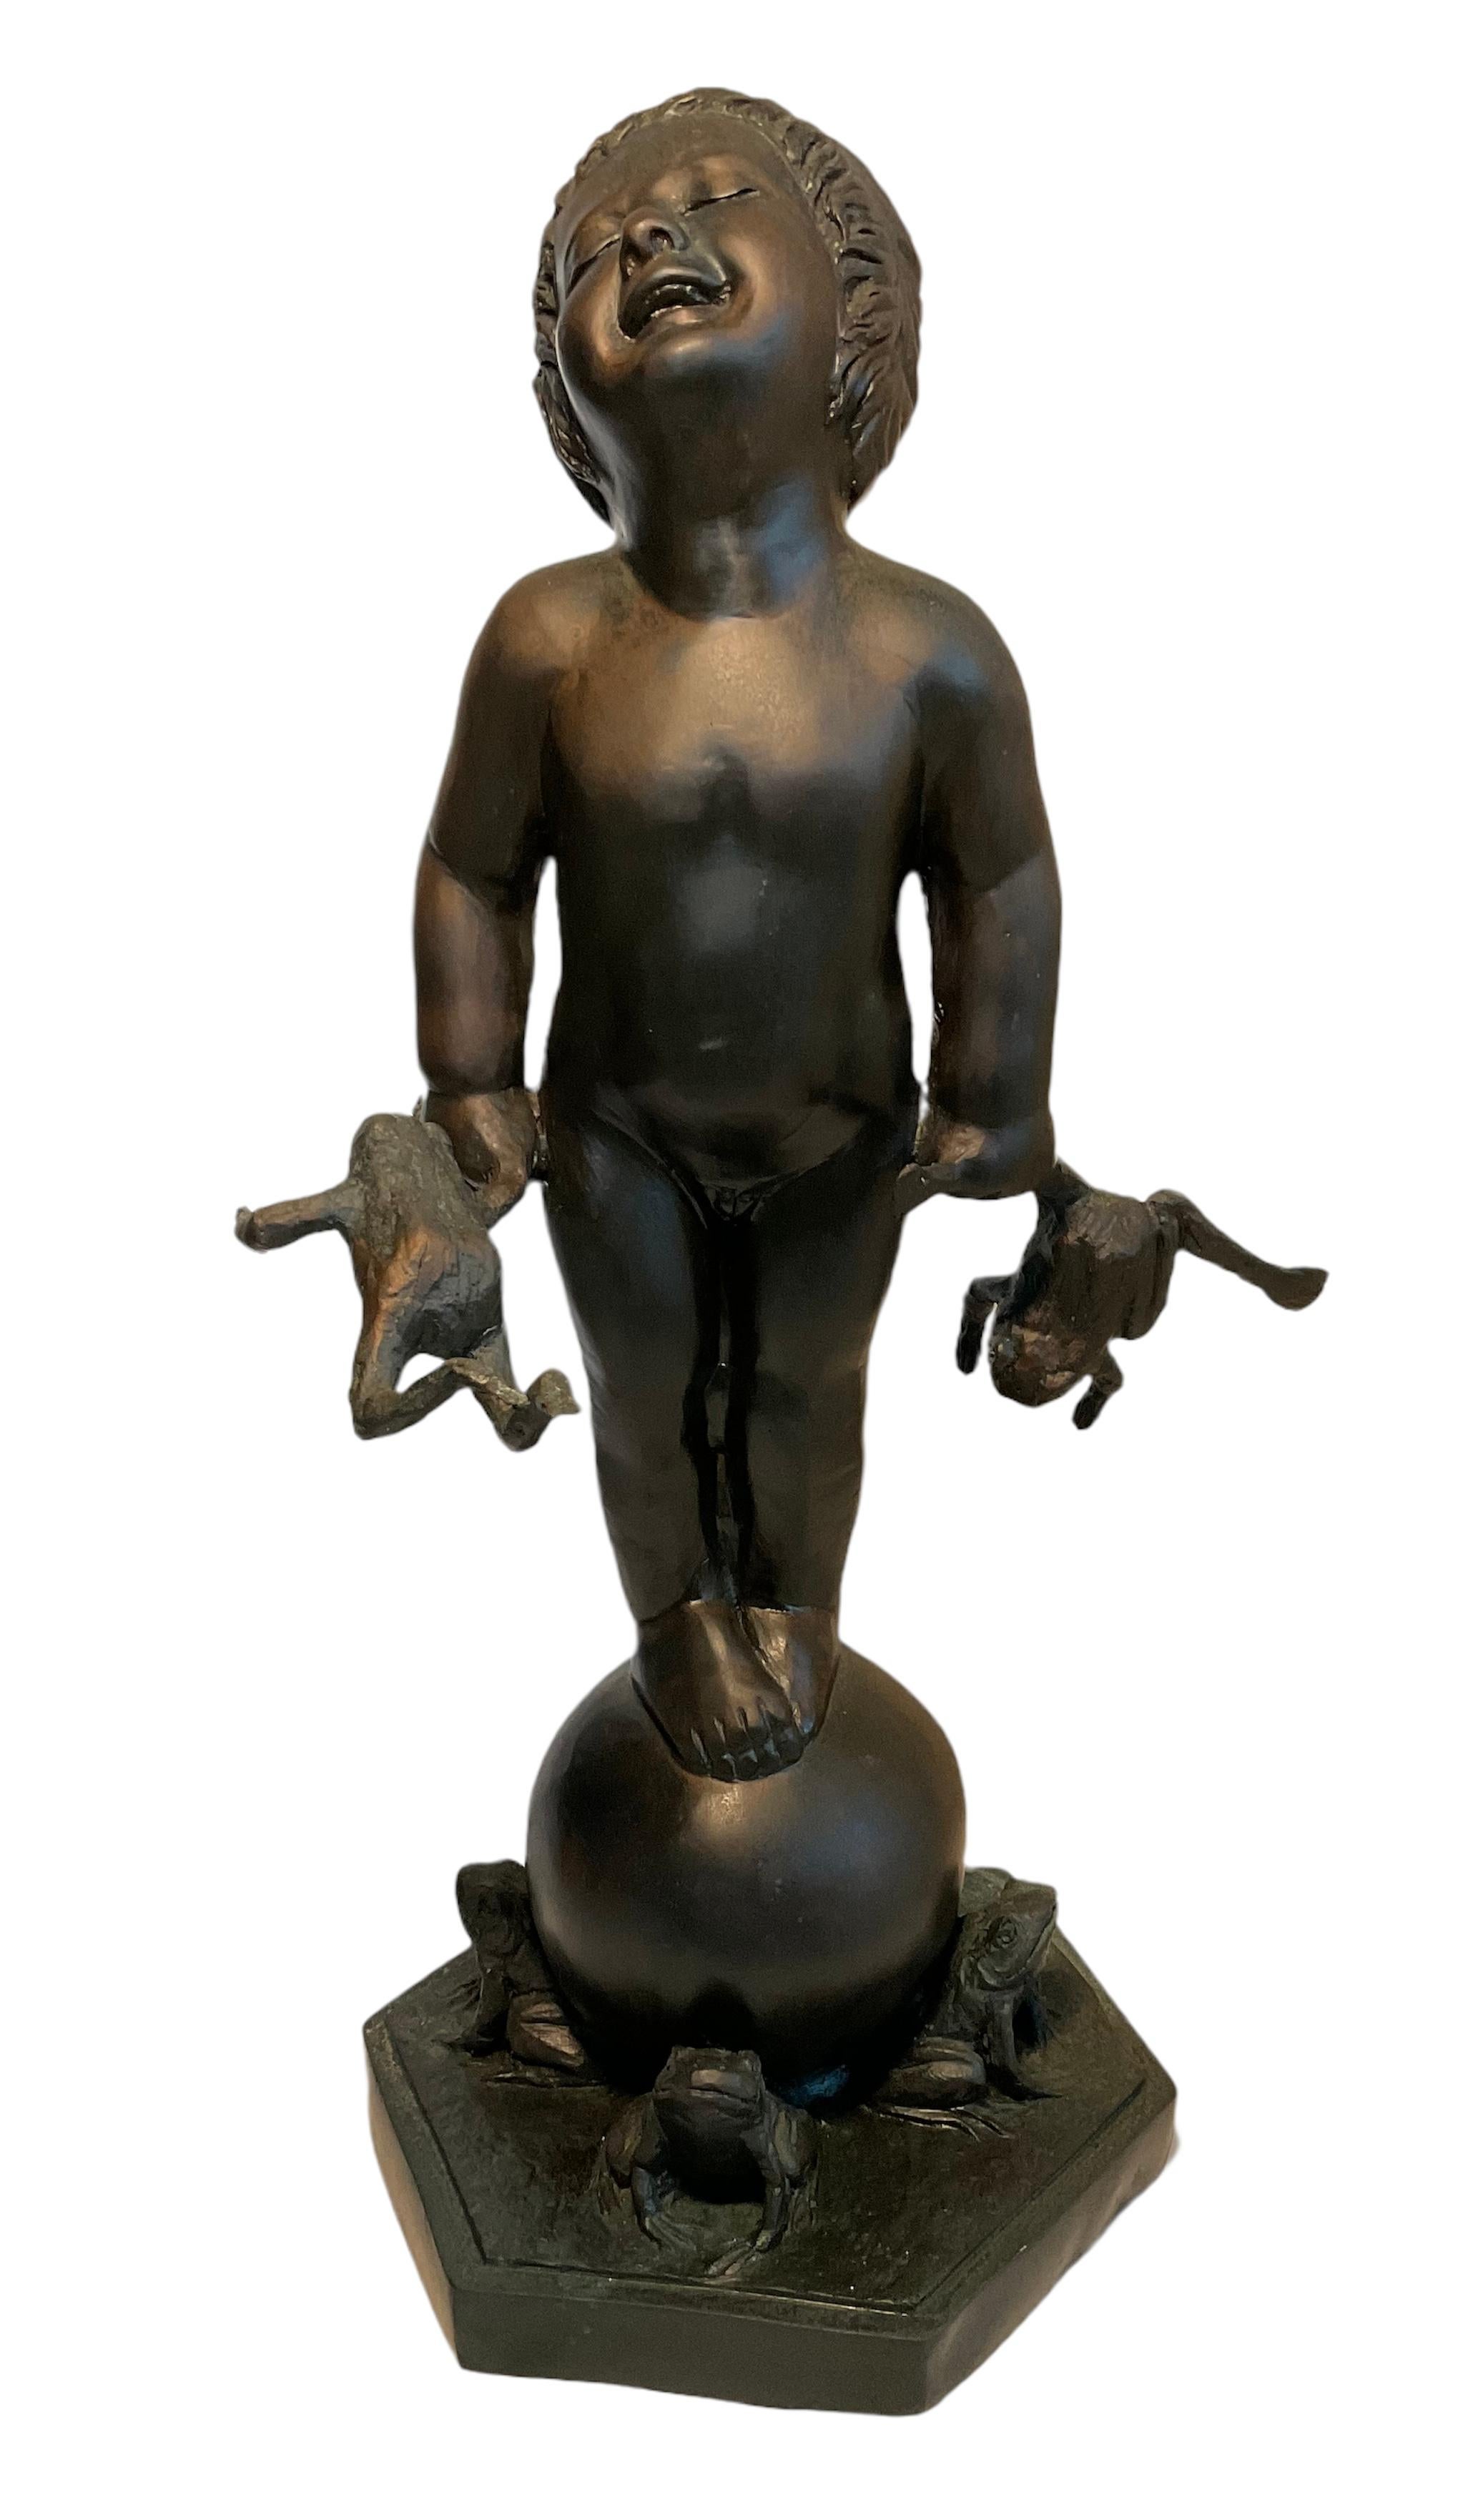 Large Bronze Sculpture of a Nude Child After Edith Barreto Parsons-Frog Baby In Good Condition For Sale In Guaynabo, PR